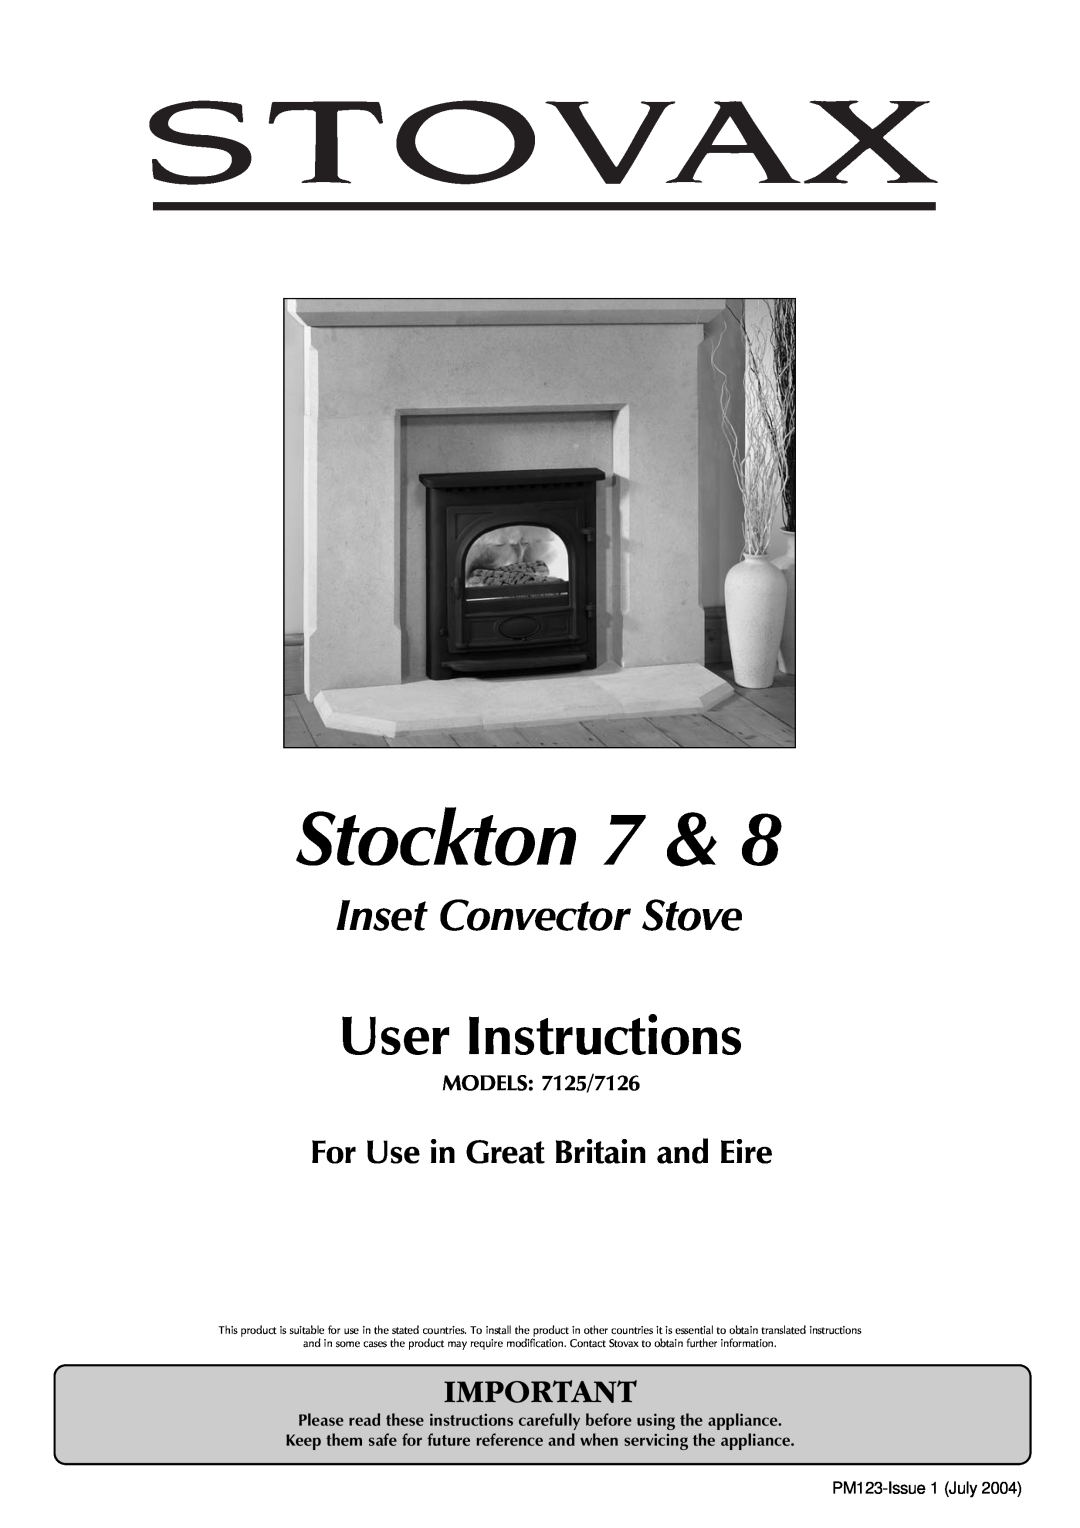 Stovax manual MODELS 7125/7126, Stockton, User Instructions, Inset Convector Stove, For Use in Great Britain and Eire 